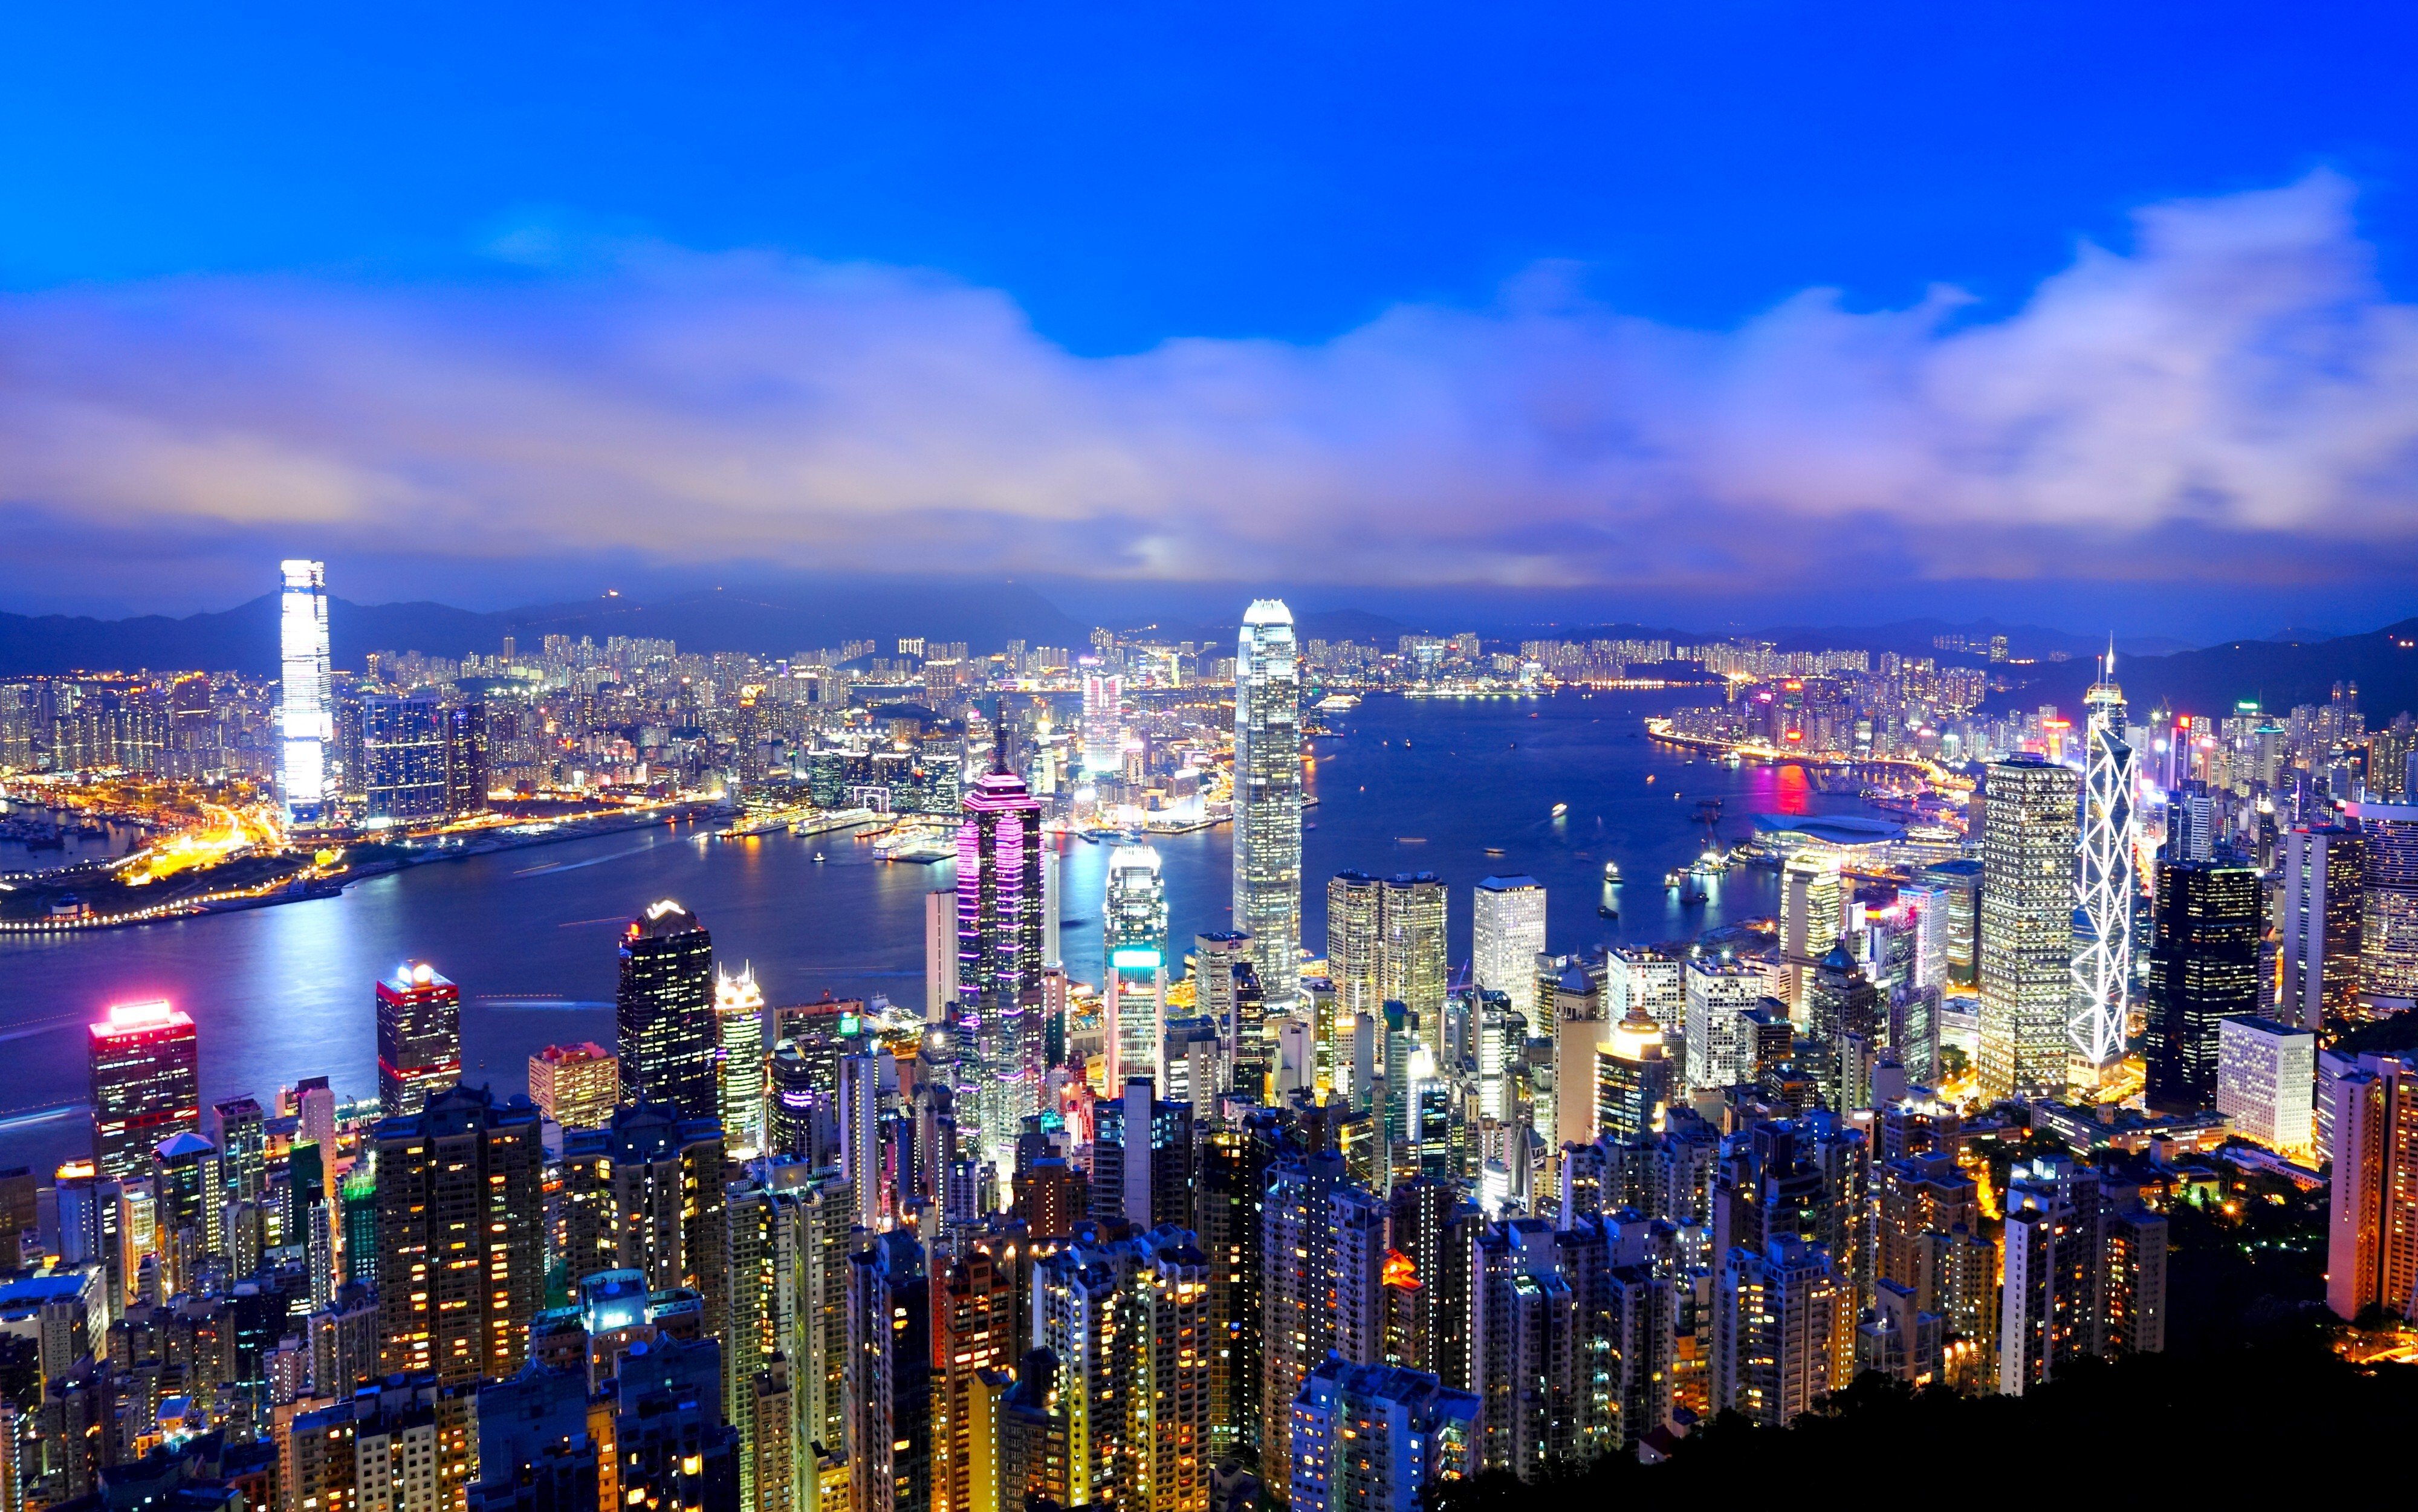 Hong Kong is intended to play a role as an Asia-Pacific headquarters and business services and innovation centre for the Greater Bay Area region, the report says. Photo: Shutterstock Images